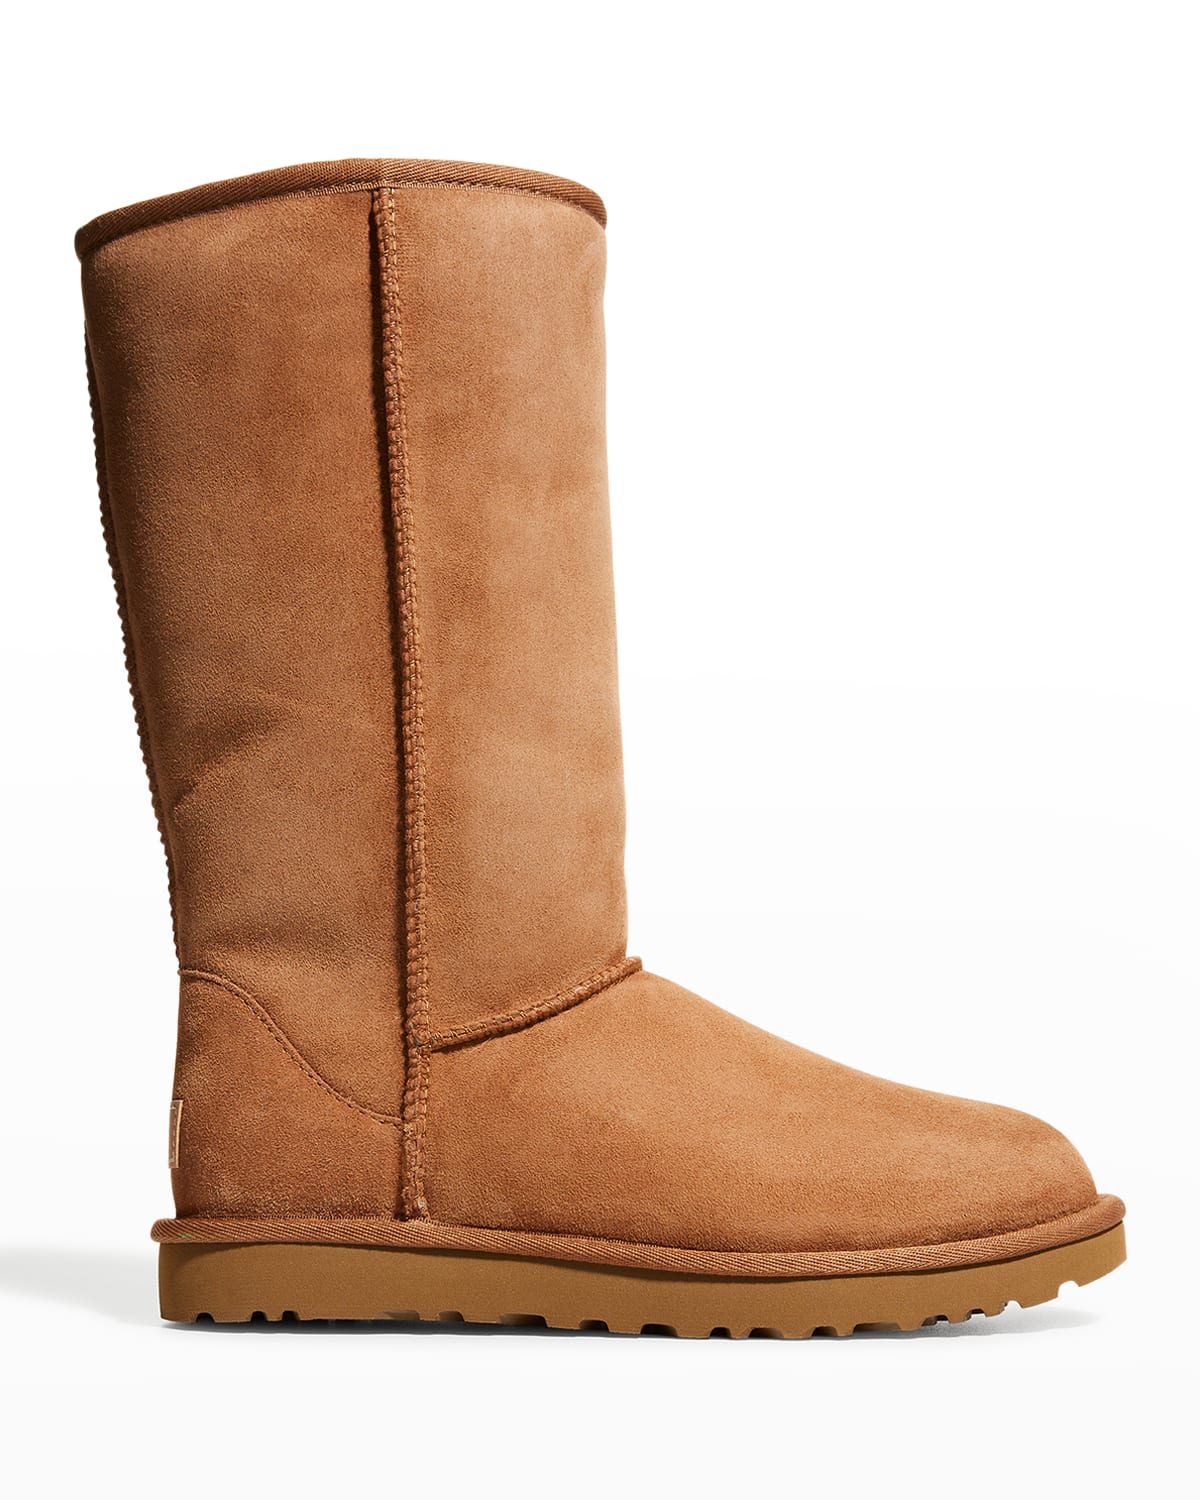 Shop Ugg Classic Tall Ii Boots In Chestnut